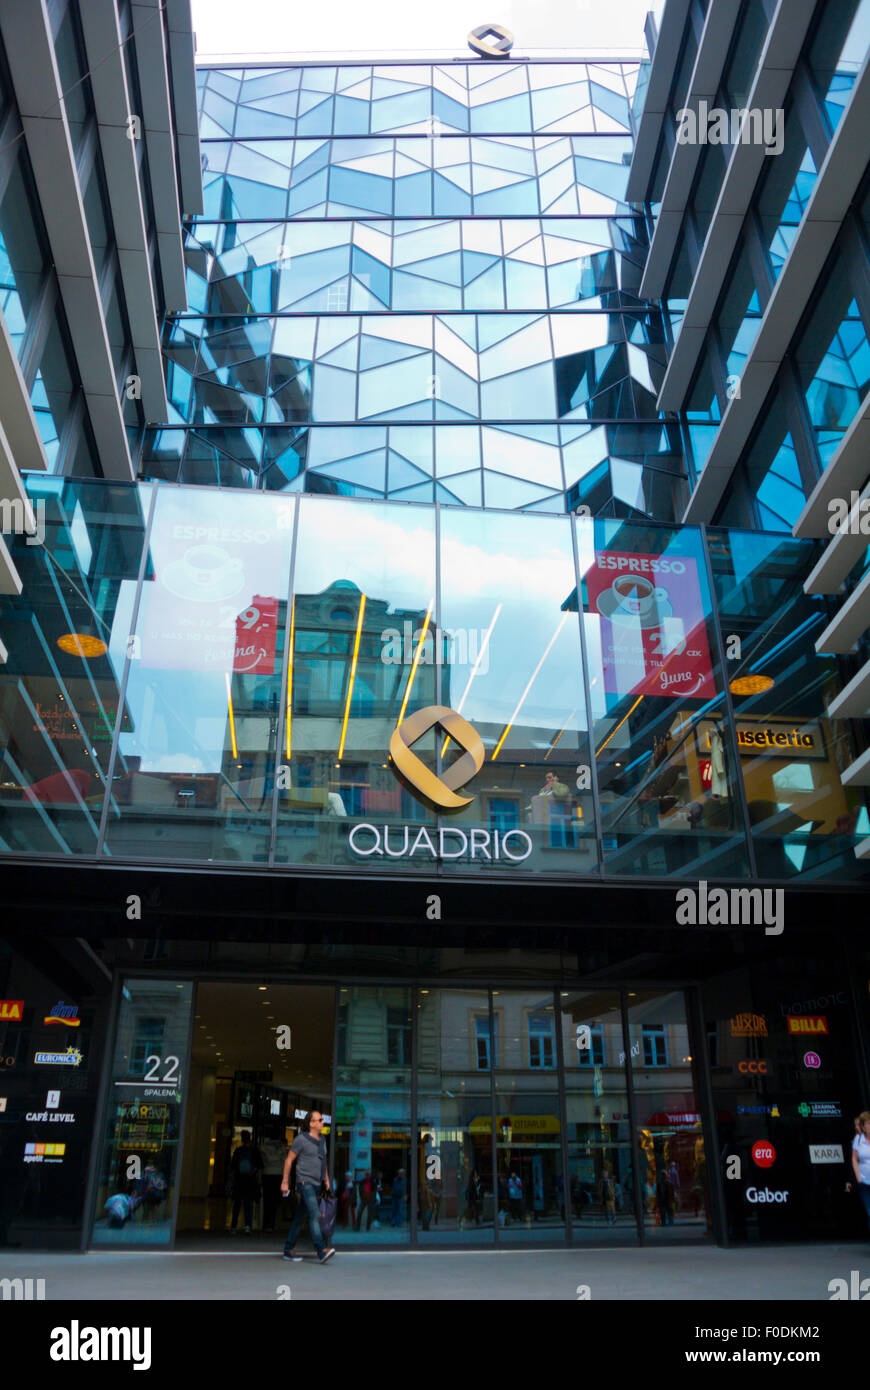 Prague Shopping Centre High Resolution Stock Photography and Images - Alamy